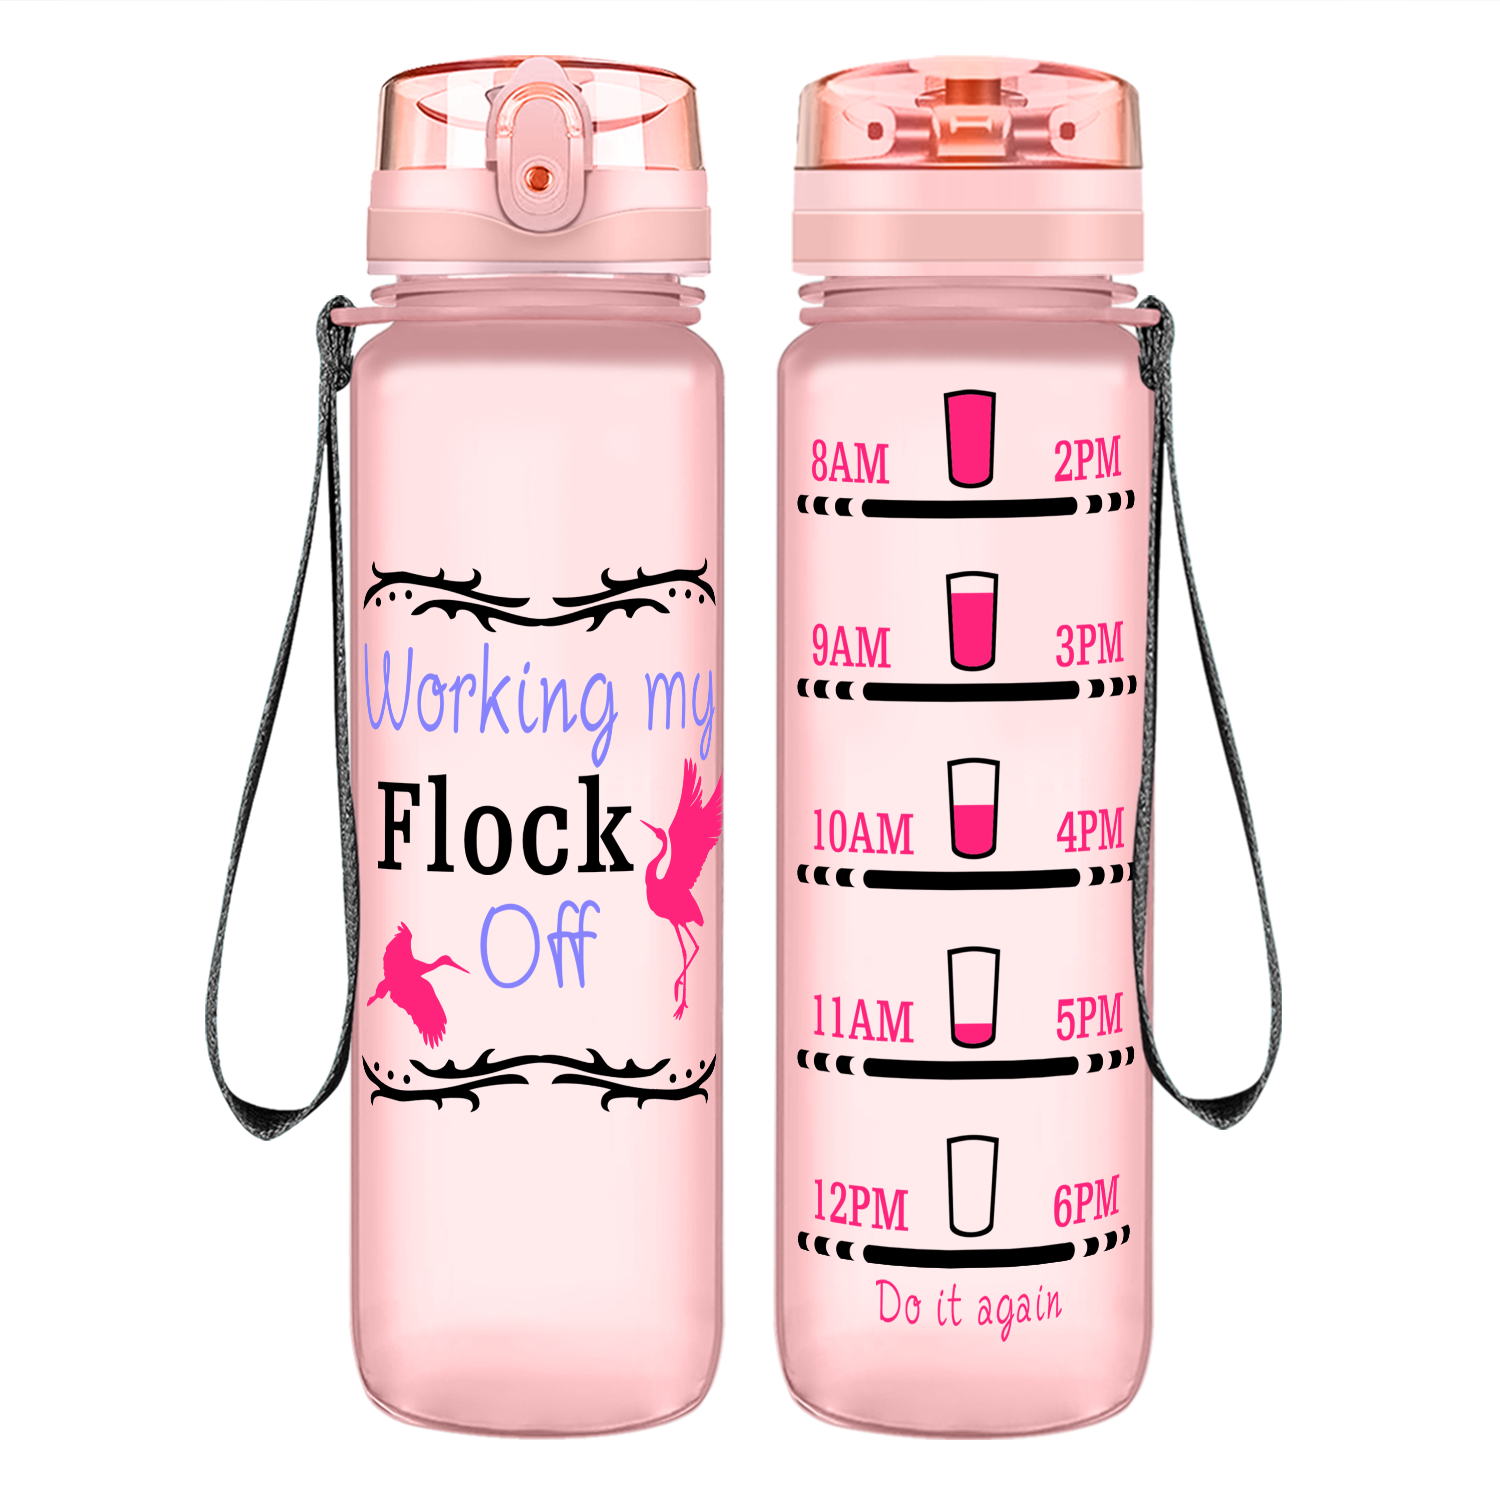 Working My Flock Off on 32 oz Motivational Tracking Water Bottle